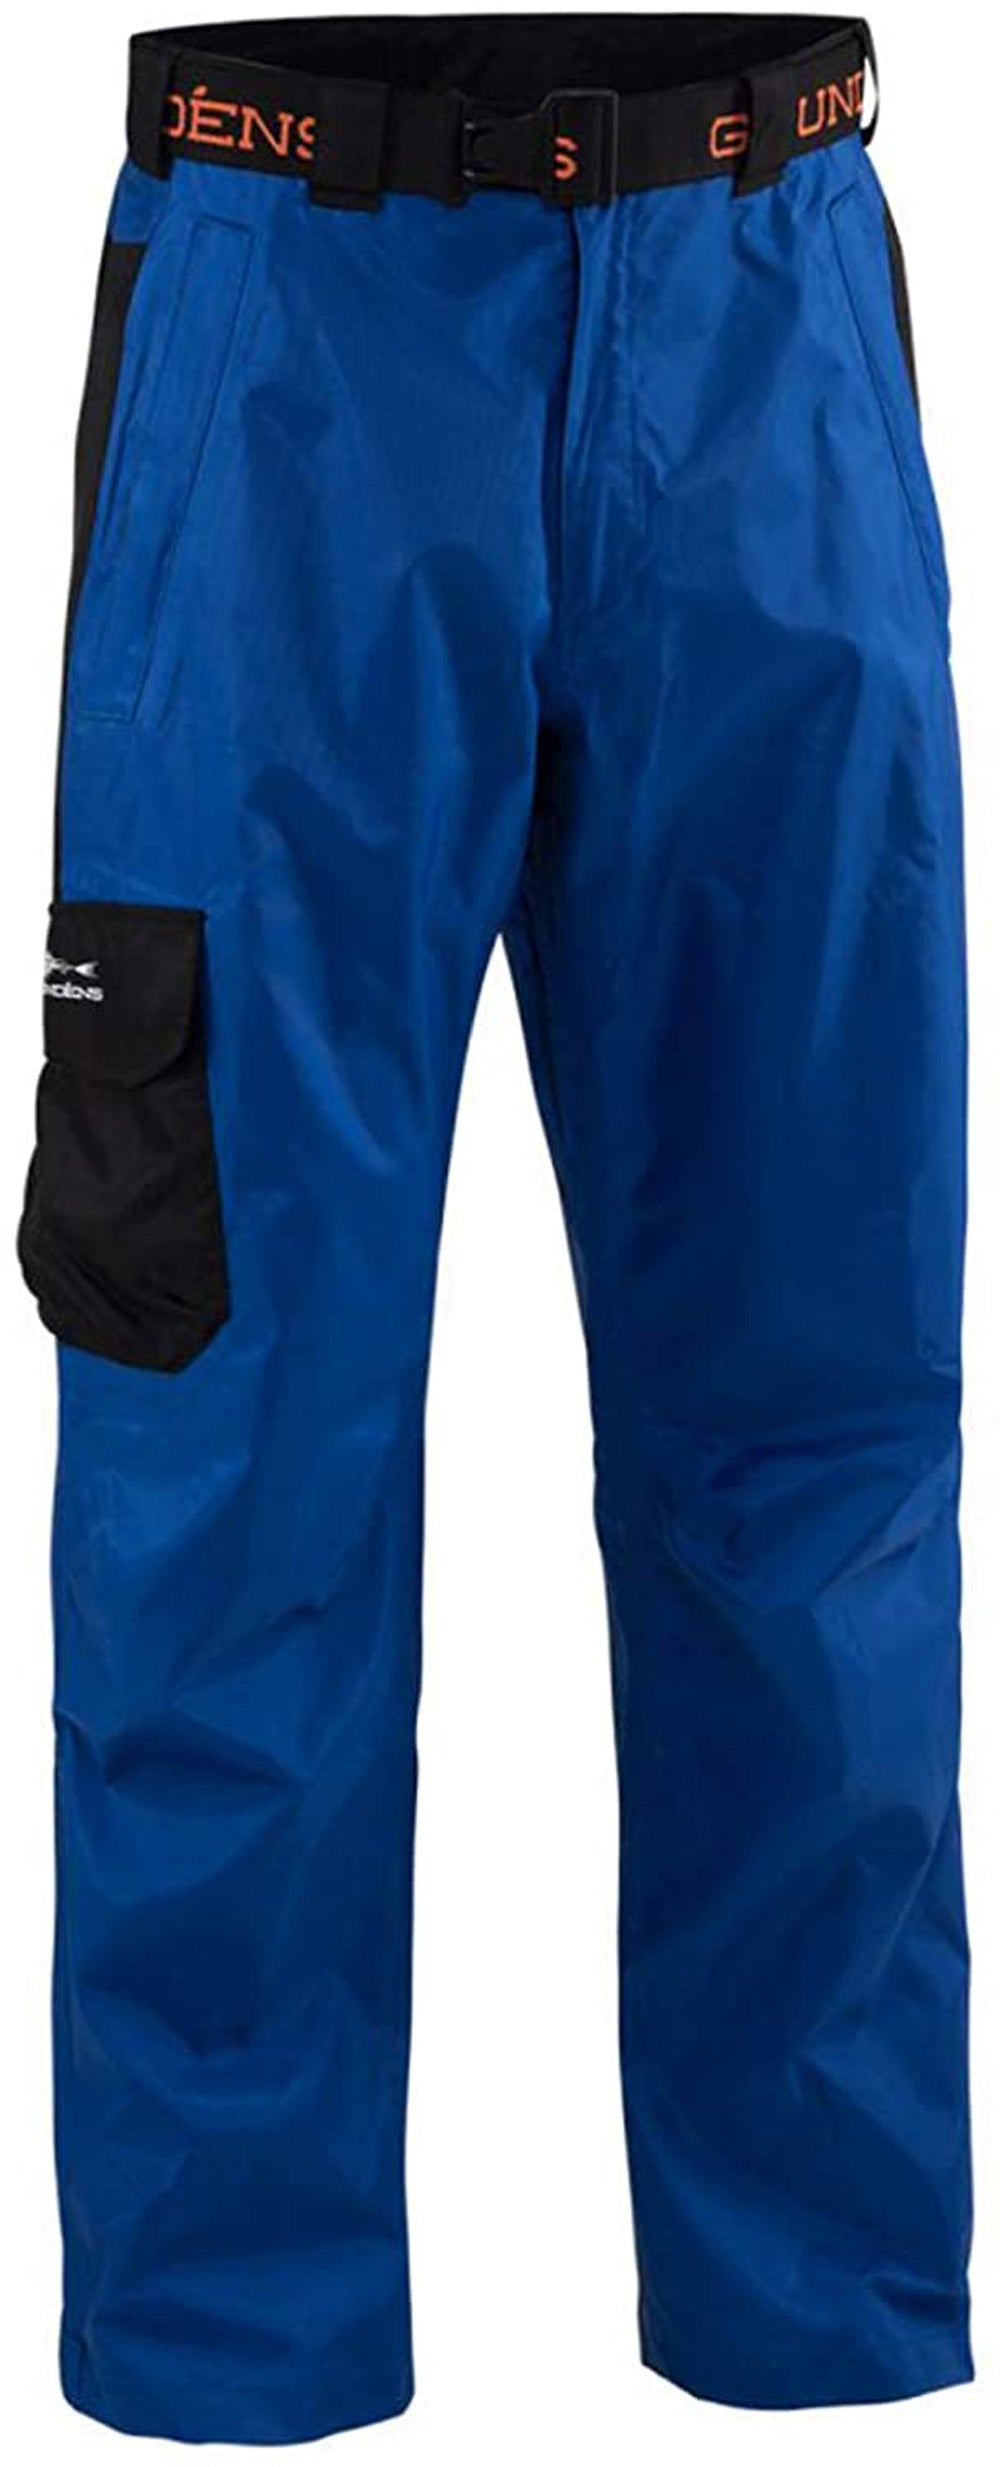 Weather Watch Pant in Glacier Blue color from the front view